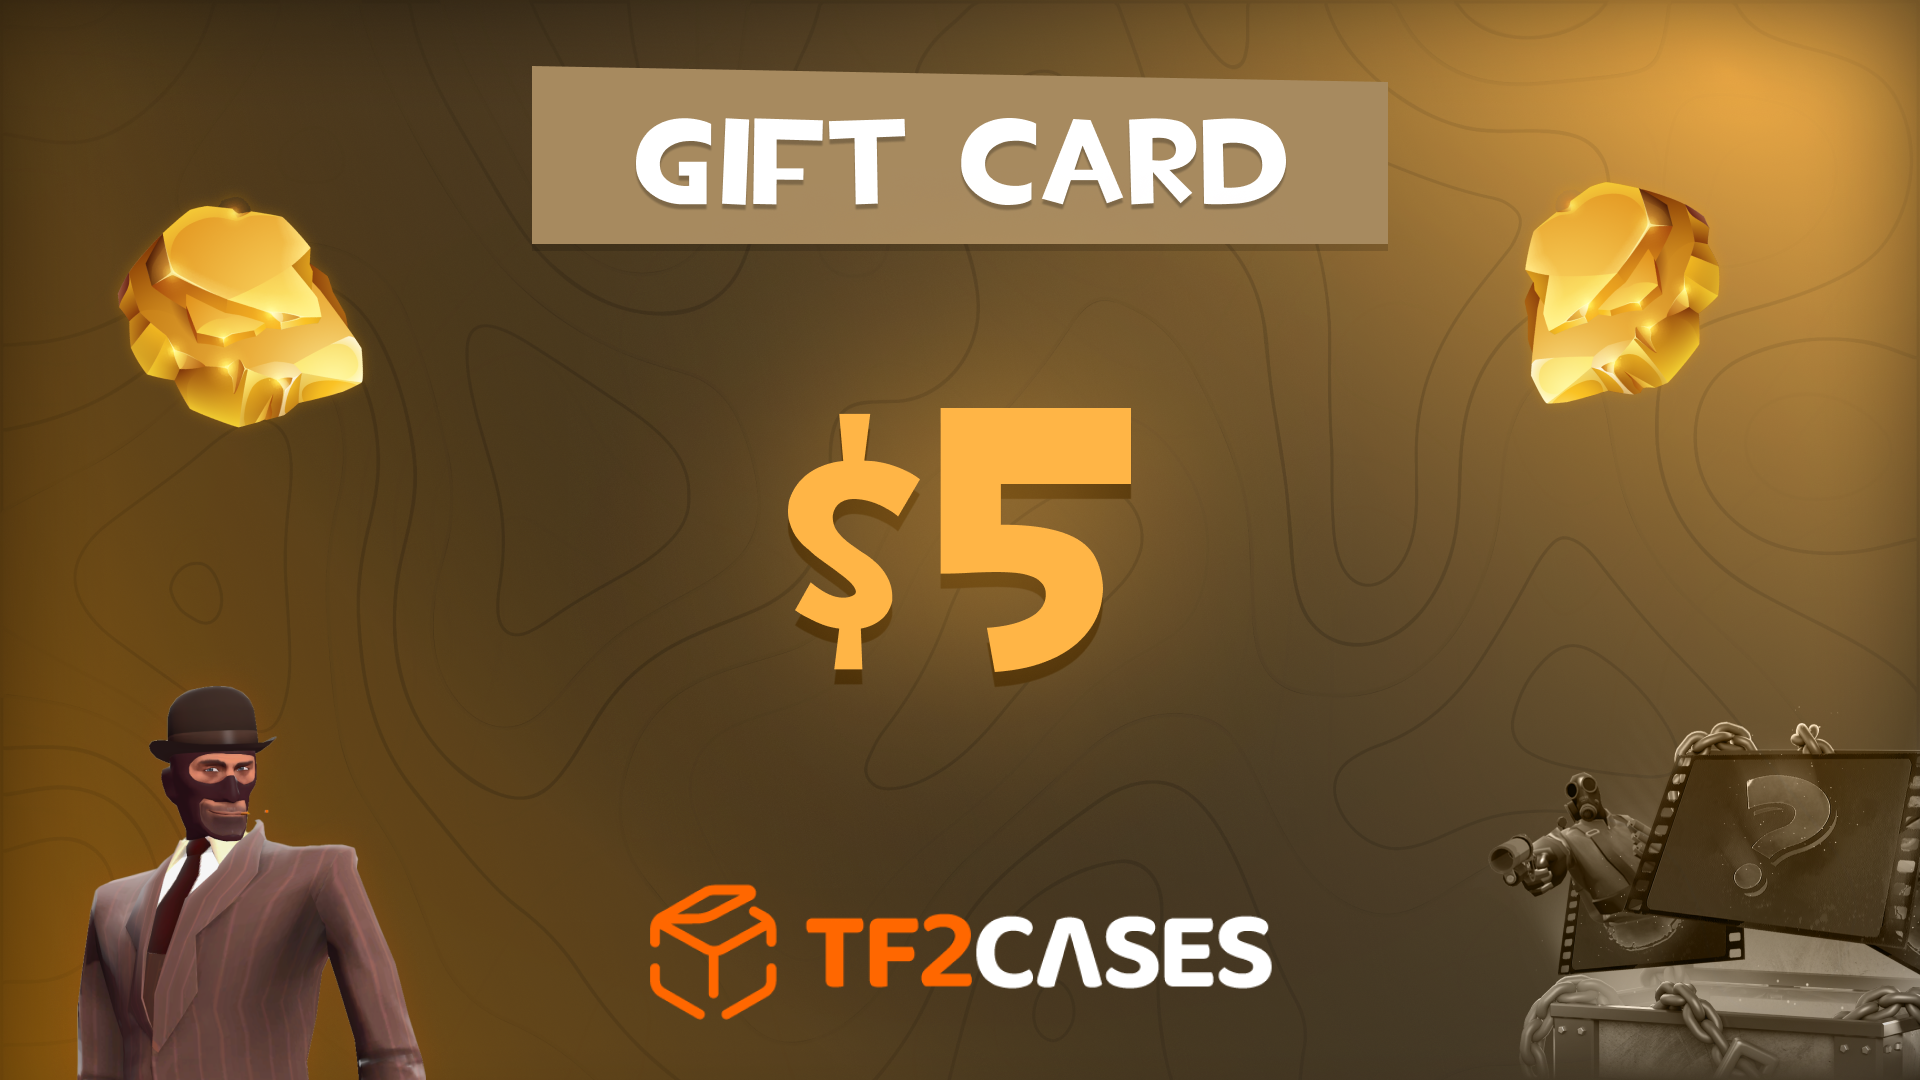 TF2CASES.com $5 Gift Card 5.65$